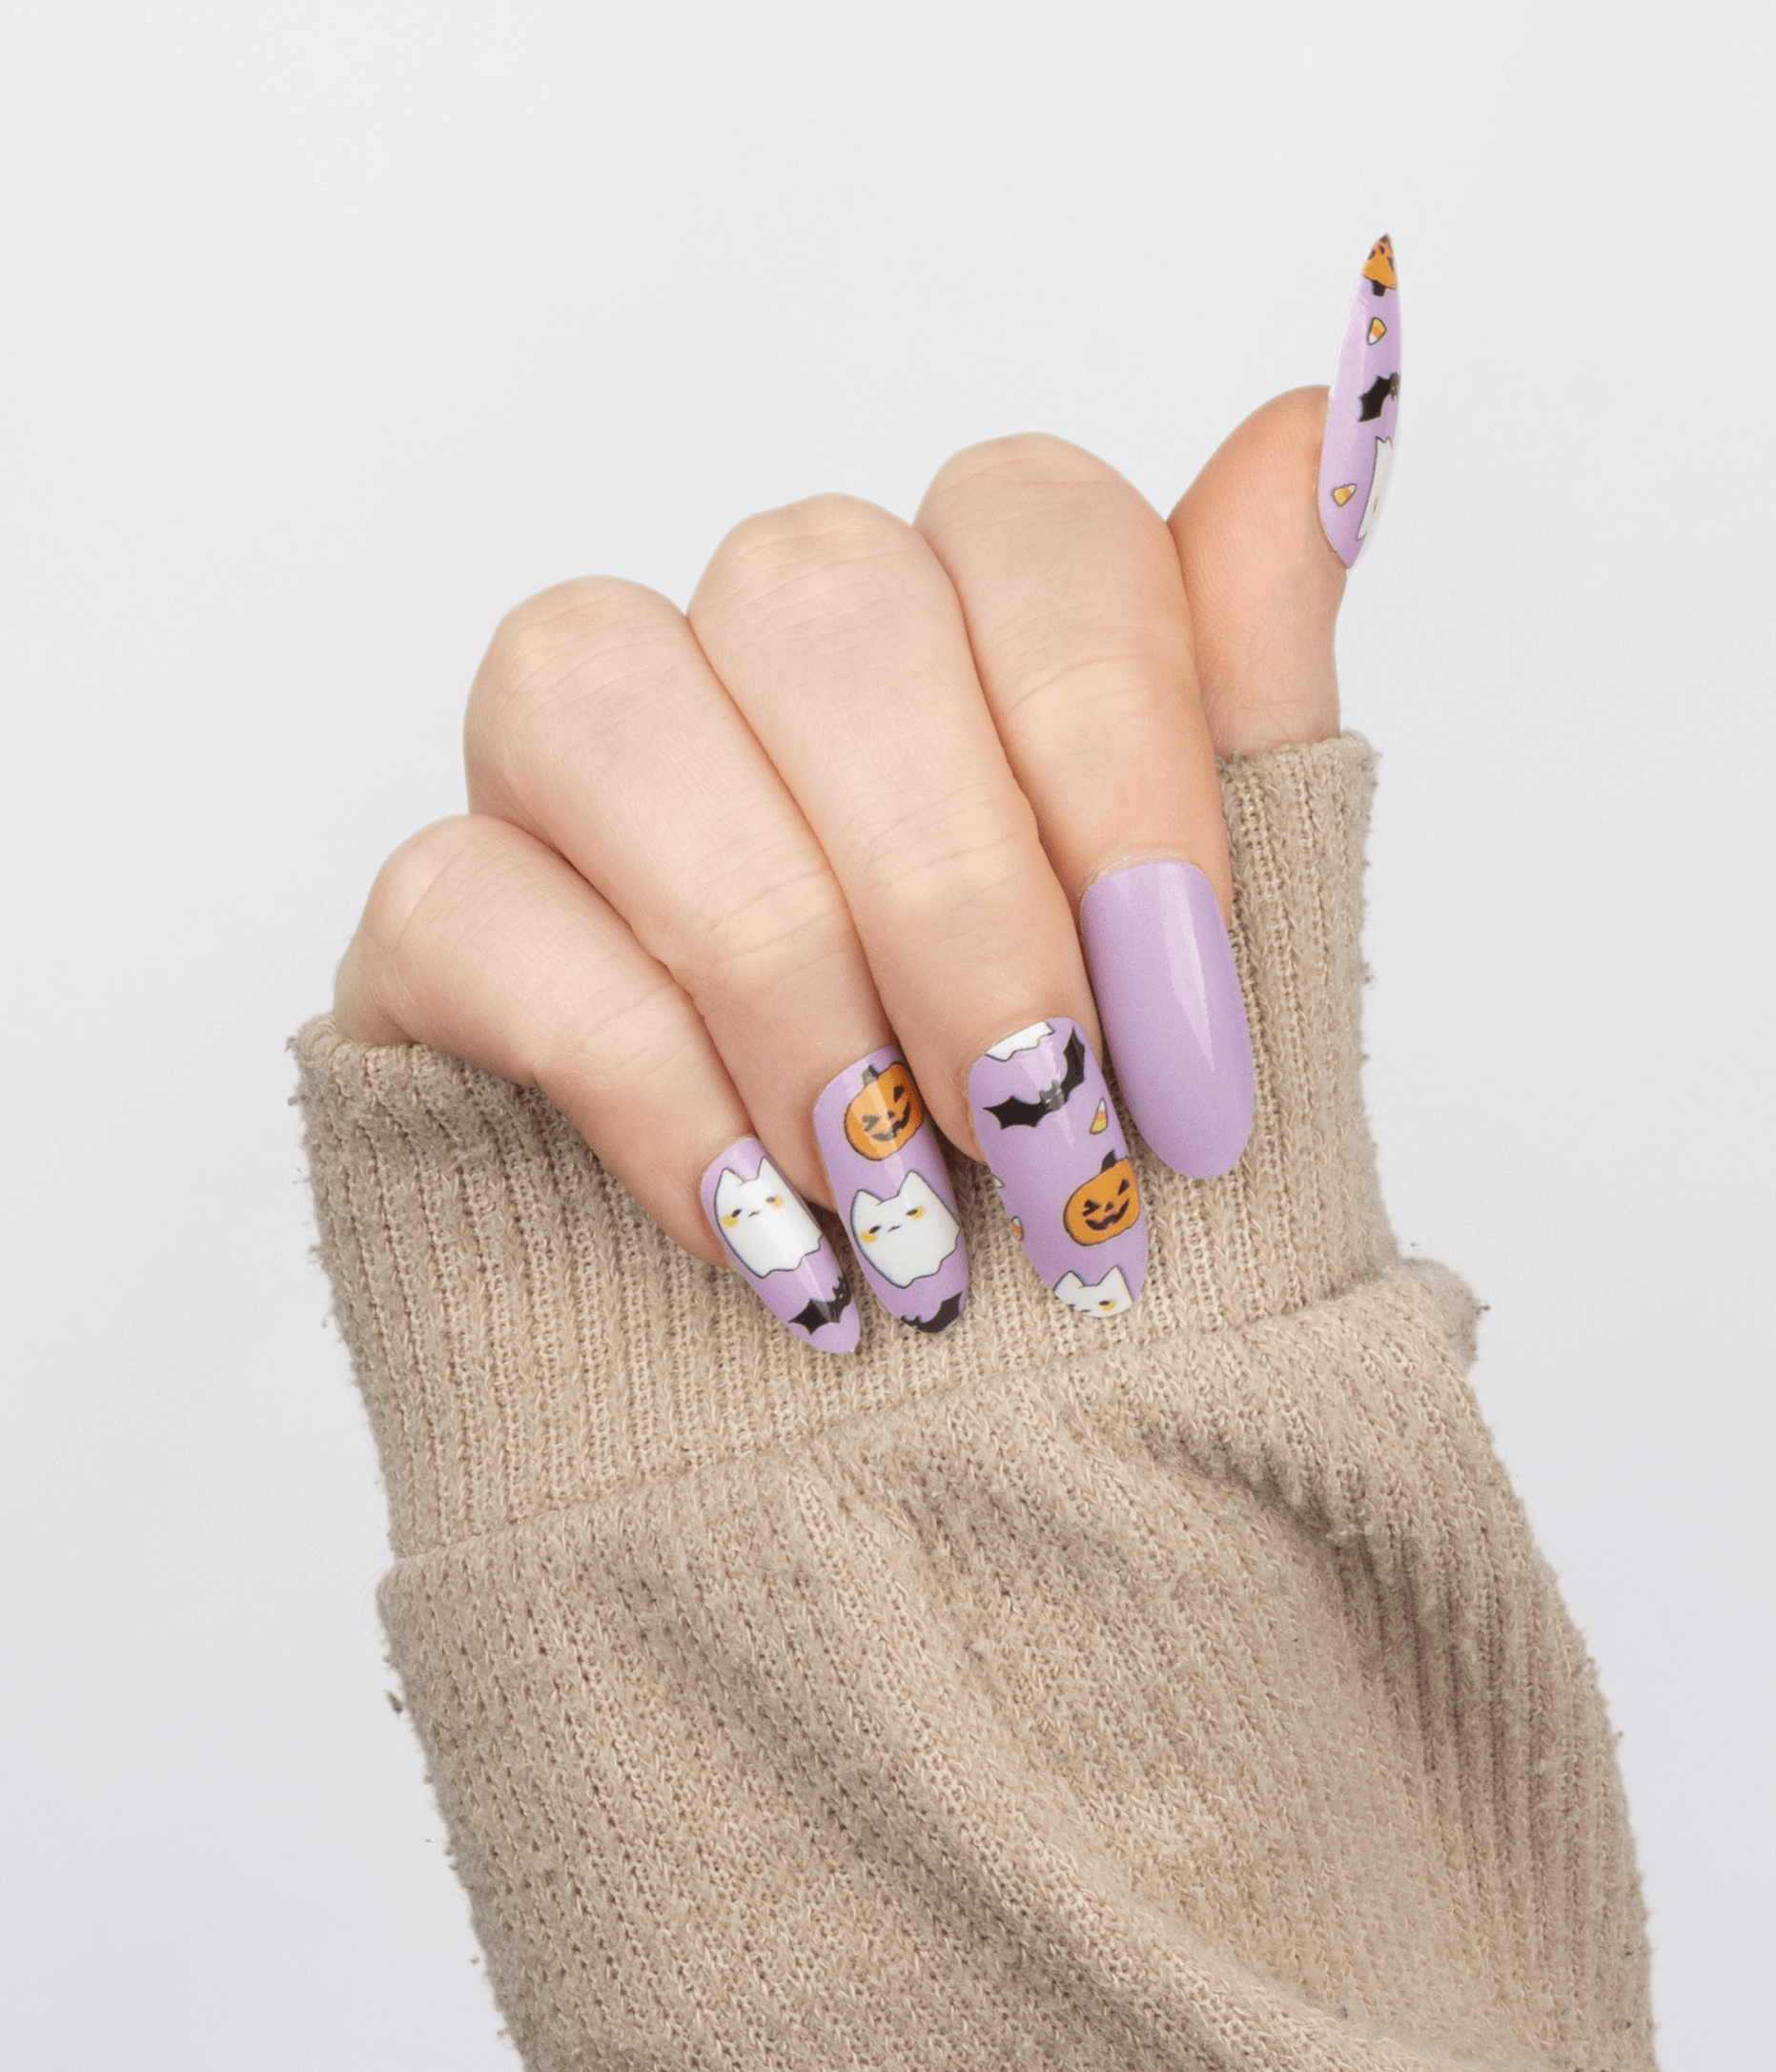 Blood Lust Nail Wraps Online Shop - Lily and Fox - Lily and Fox USA